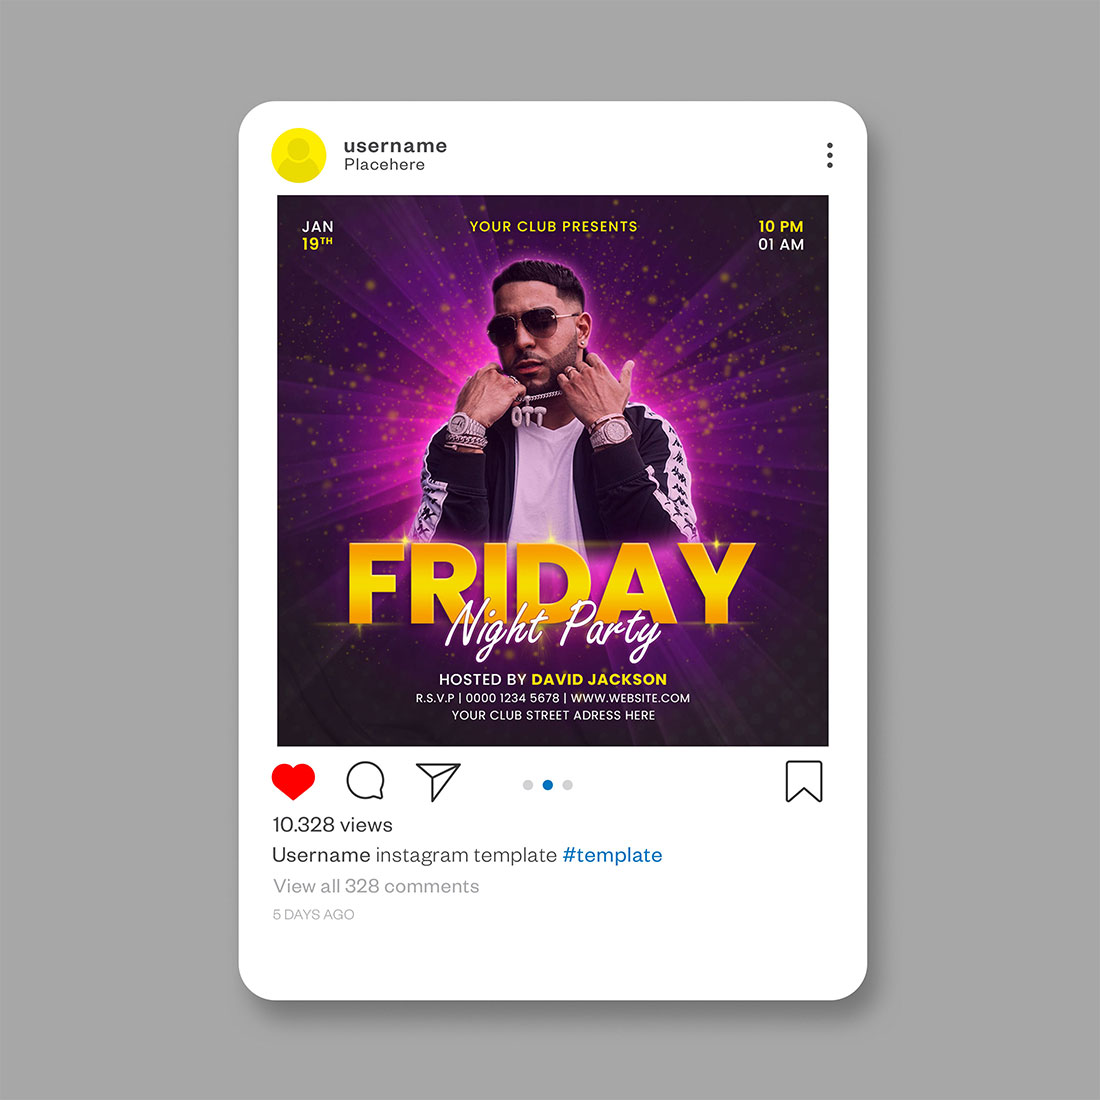 Friday music fest dj party flyer social media post design template preview image.